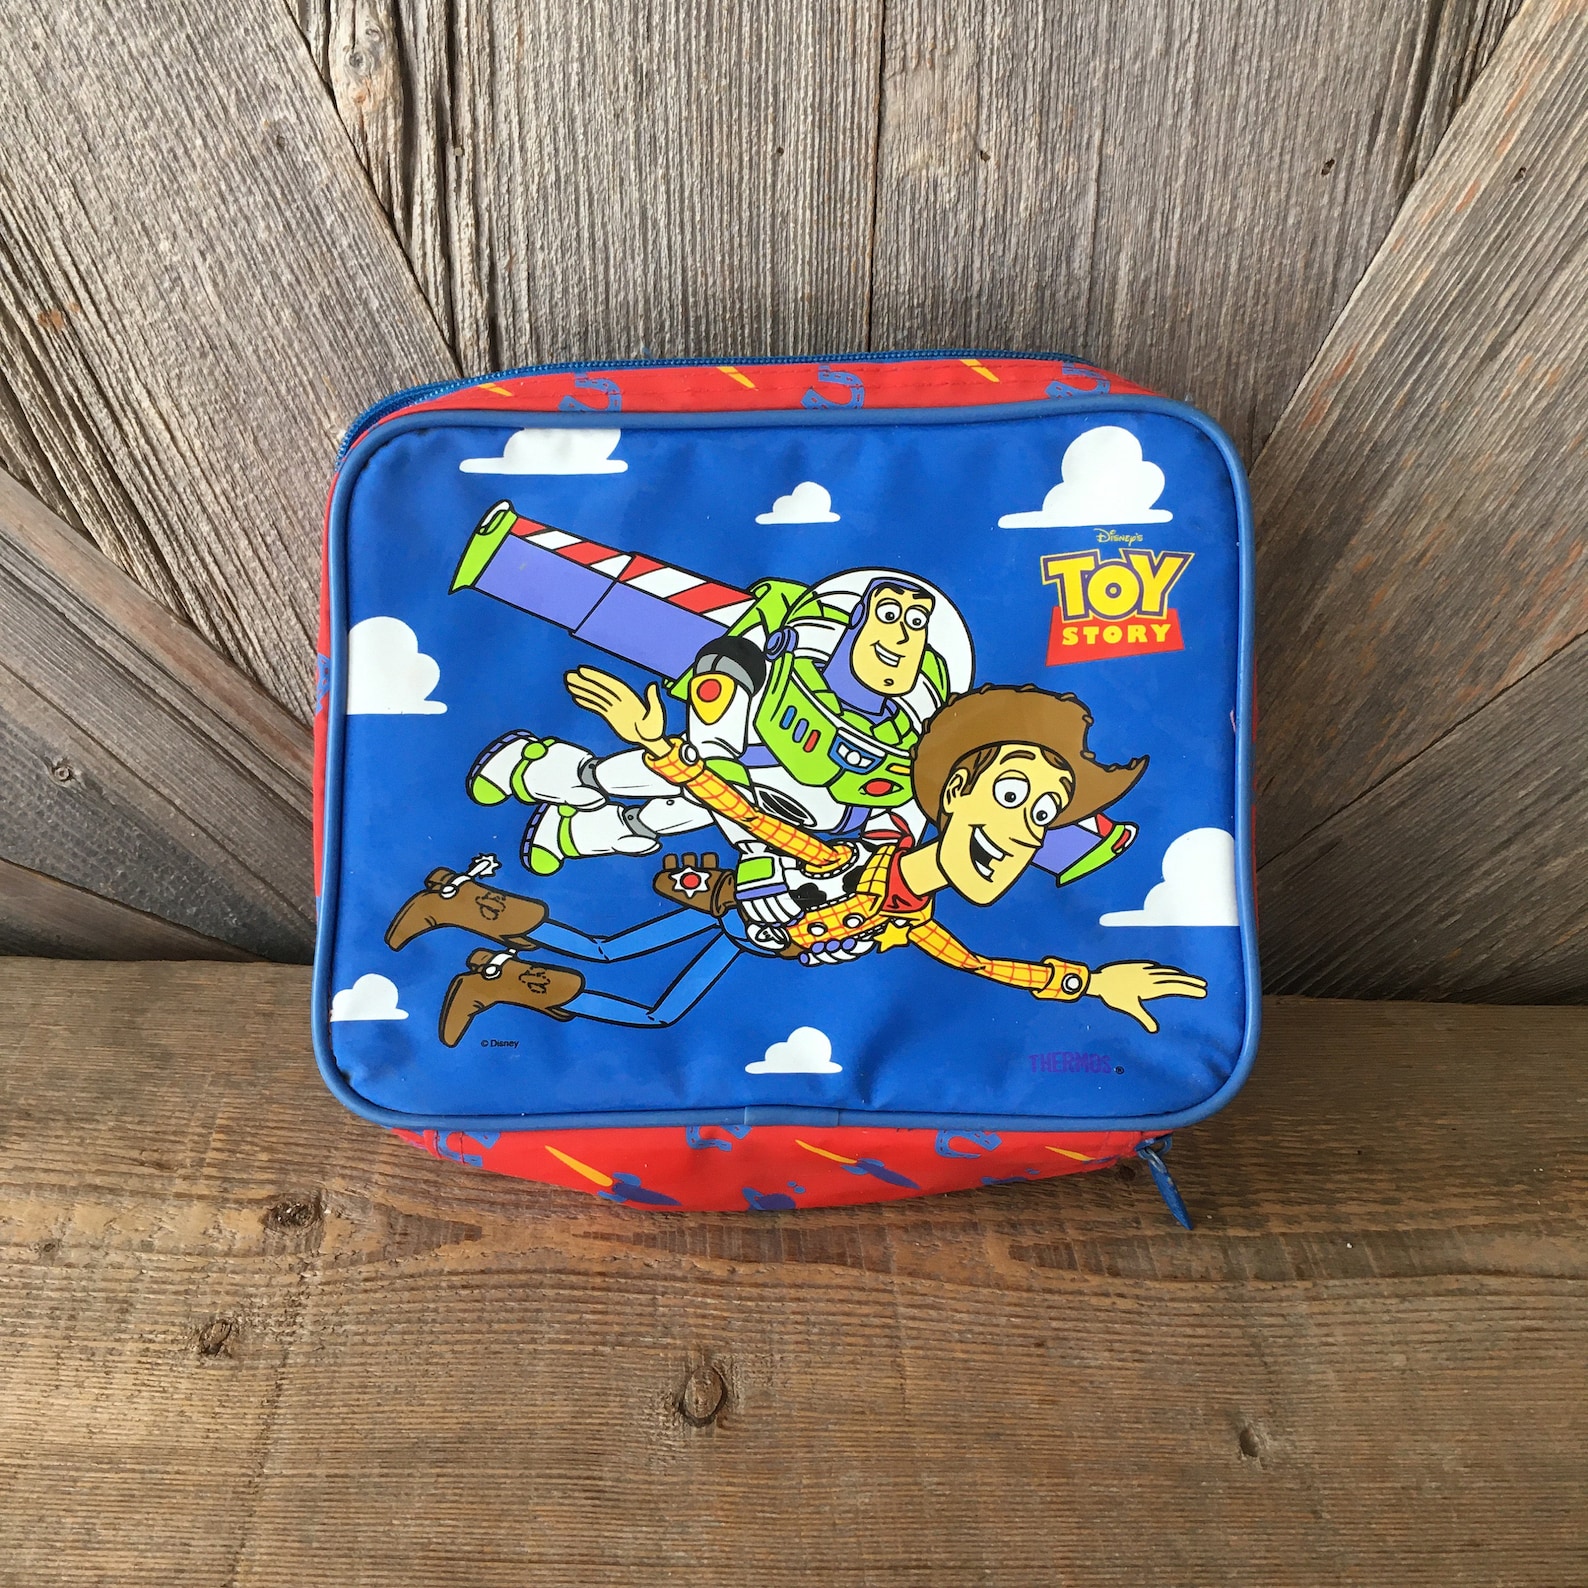 Toy Story Lunch Box Soft Fabric Vintage Disney Thermos Brand - Etsy